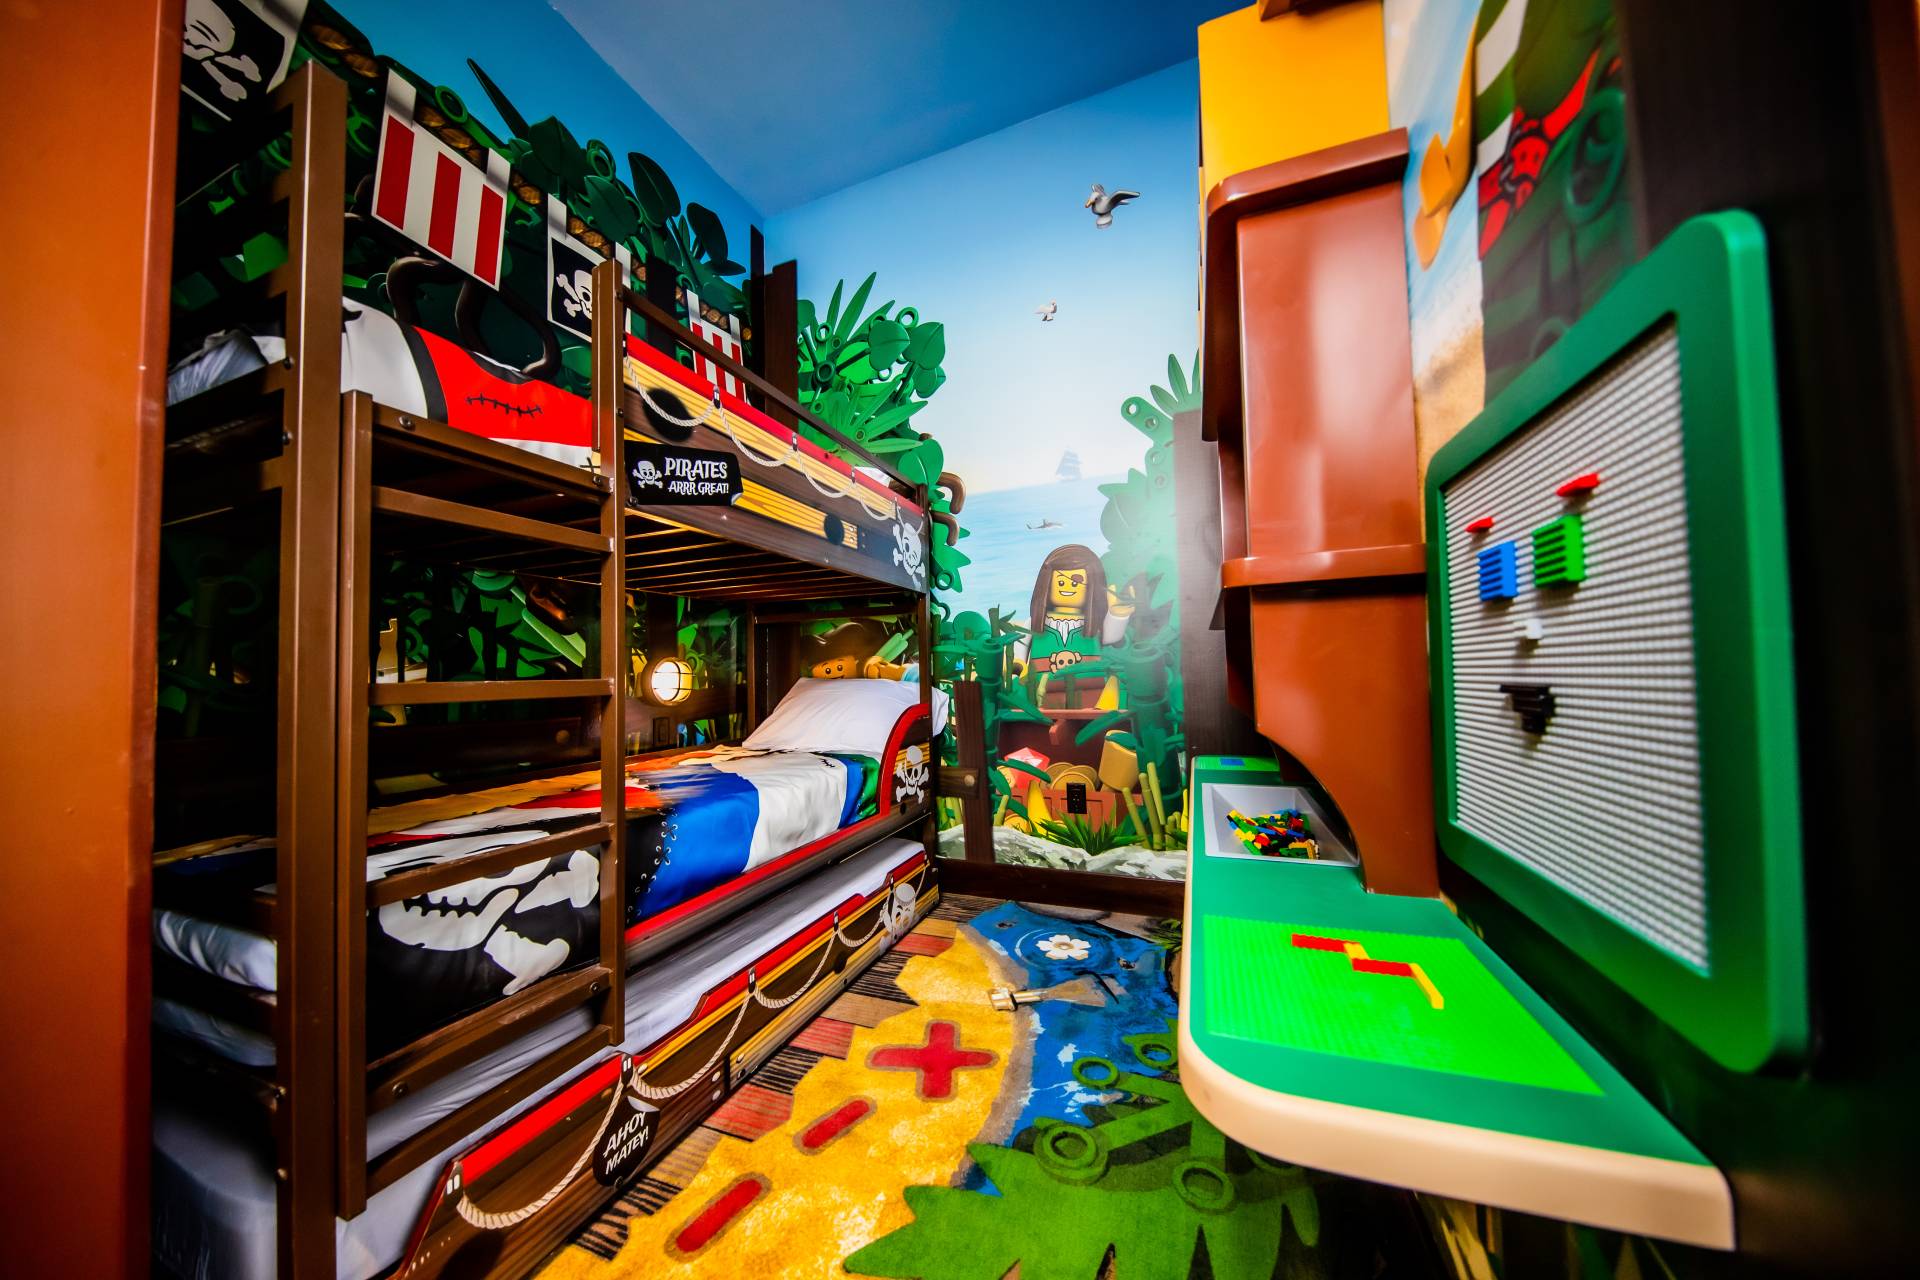 Kids' sleeping area in a themed room at Pirate Island Hotel